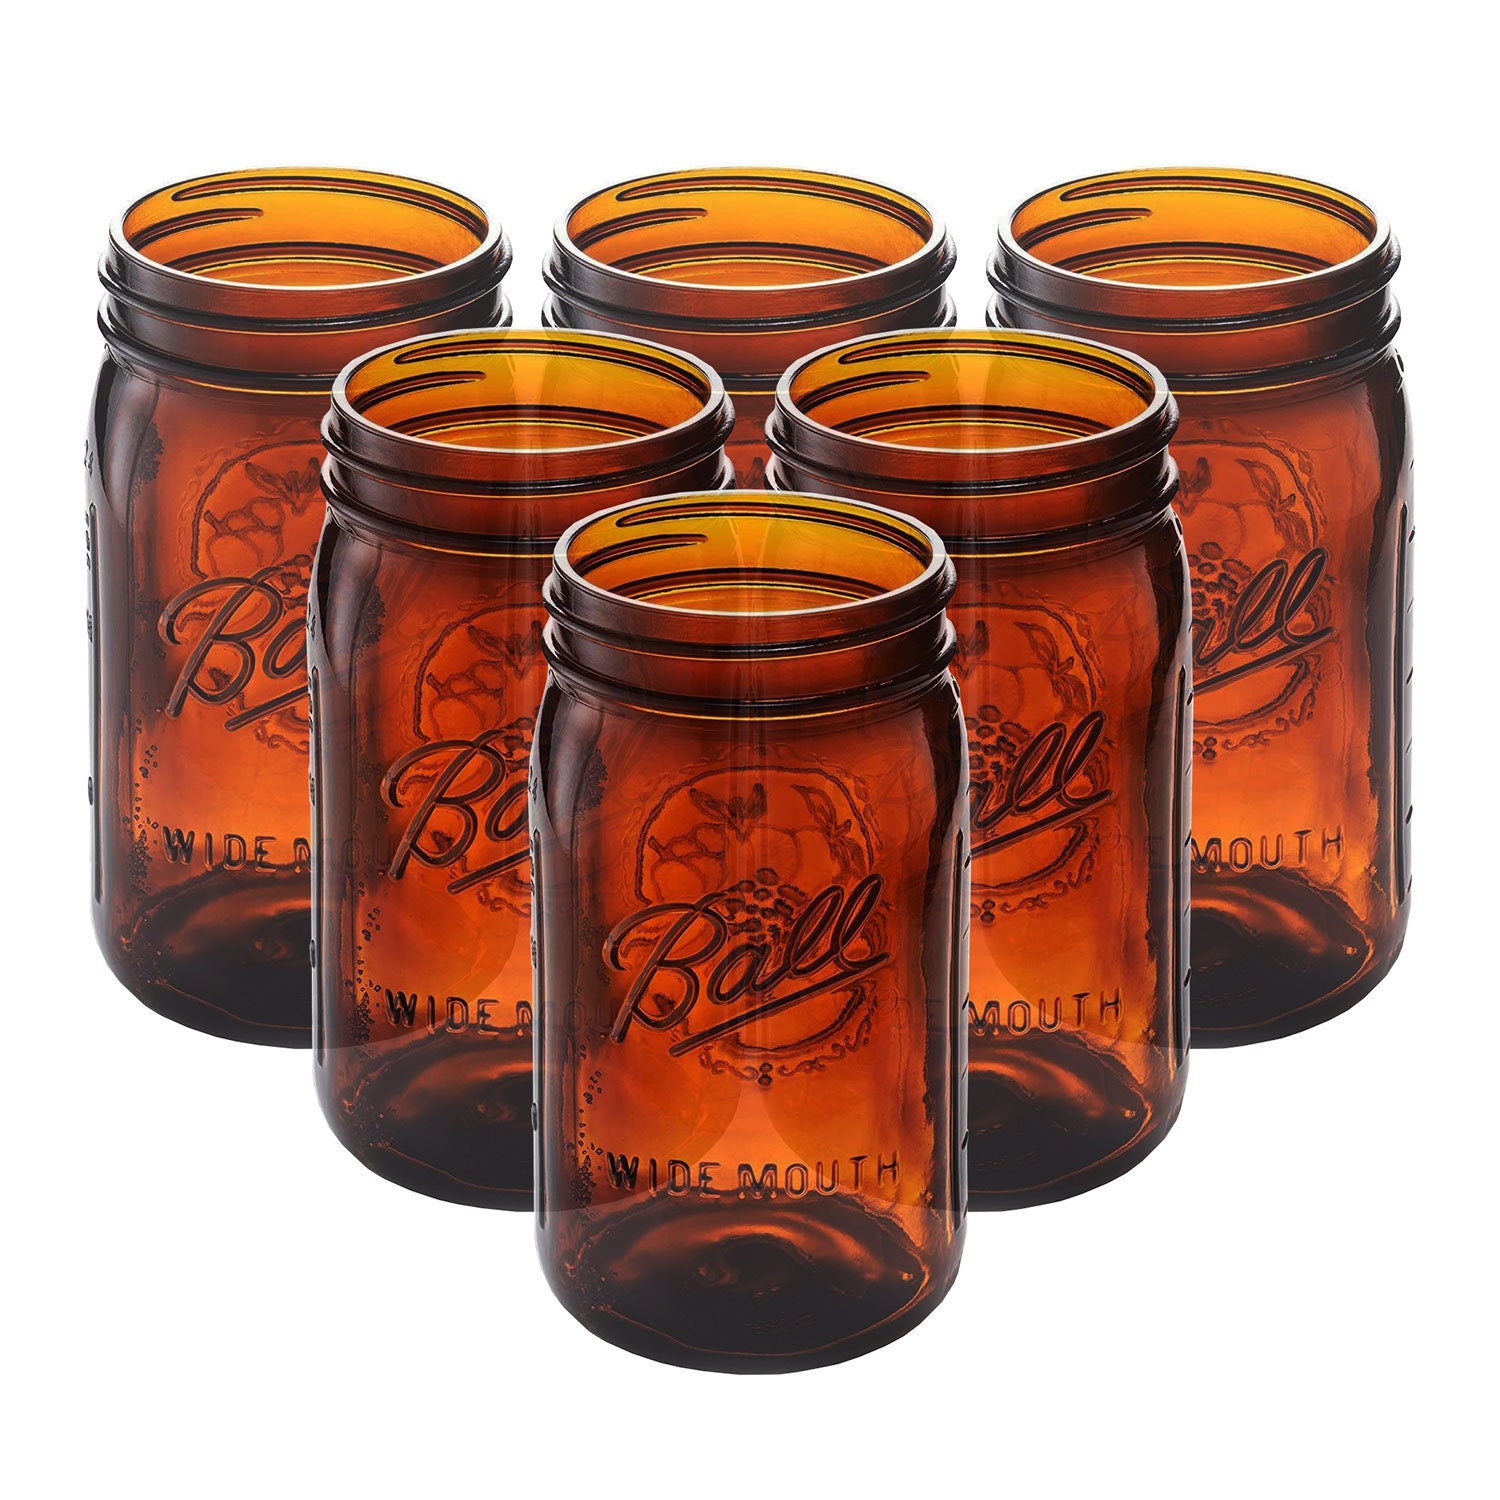 Eleganttime Amber Glass Mason Jars 32 oz Wide Mouth with Airtight Lids and Bands 6 Pack Large Glass Canning Mason Jars with Lids Quart Wide Mason Jars